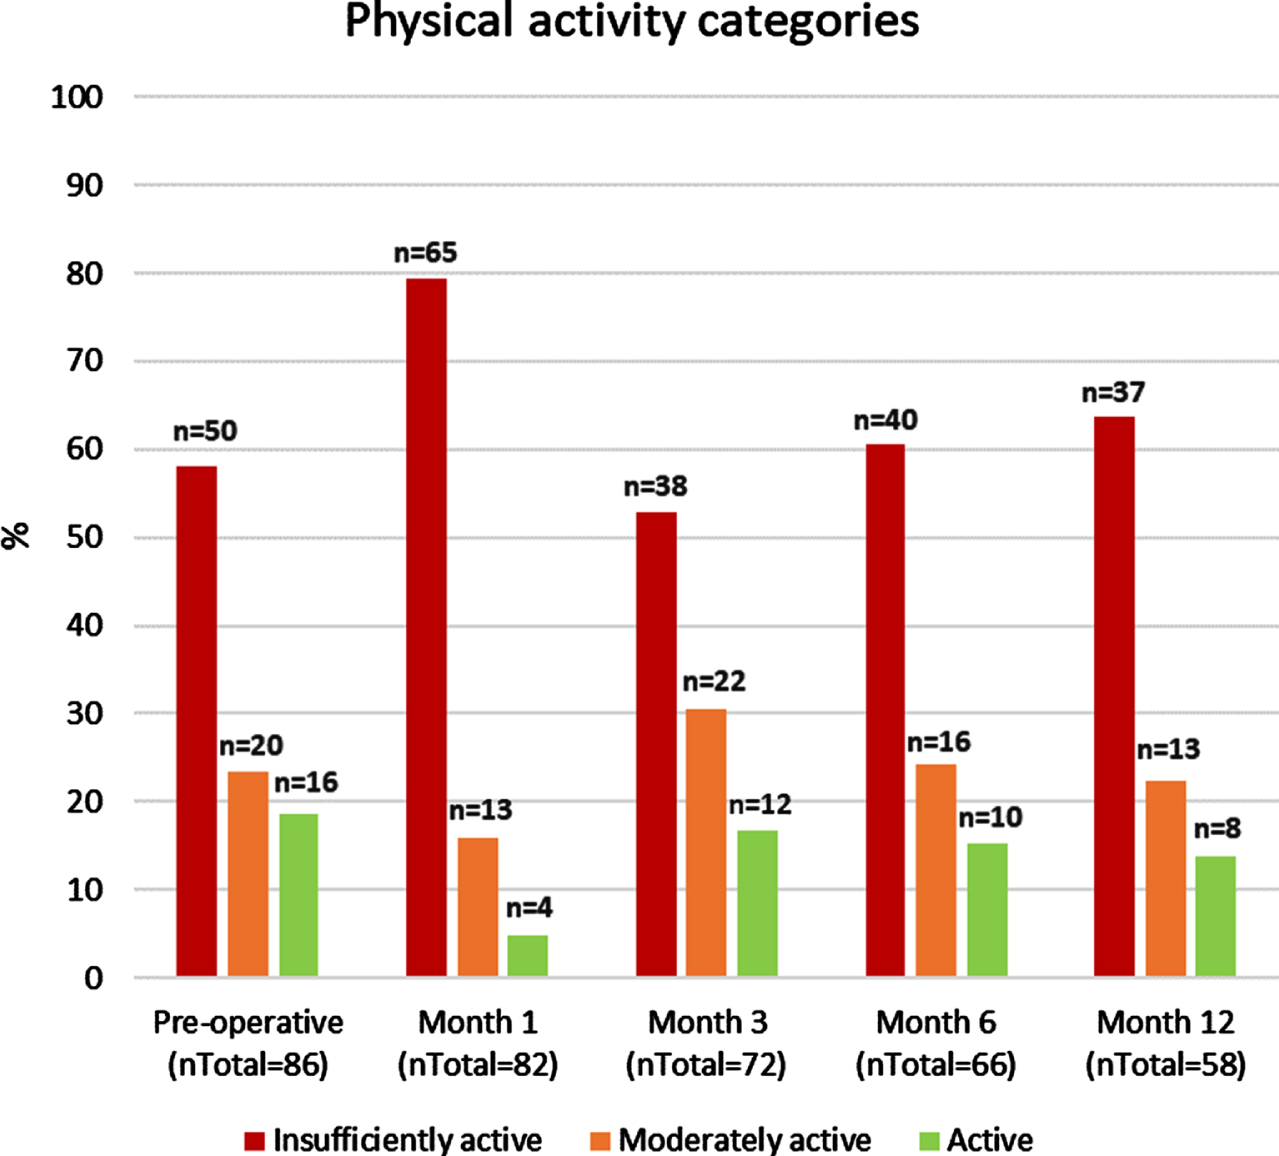 Physical activity categories according to the Godin Leisure Time Questionnaire from baseline to one year after radical cystectomy.